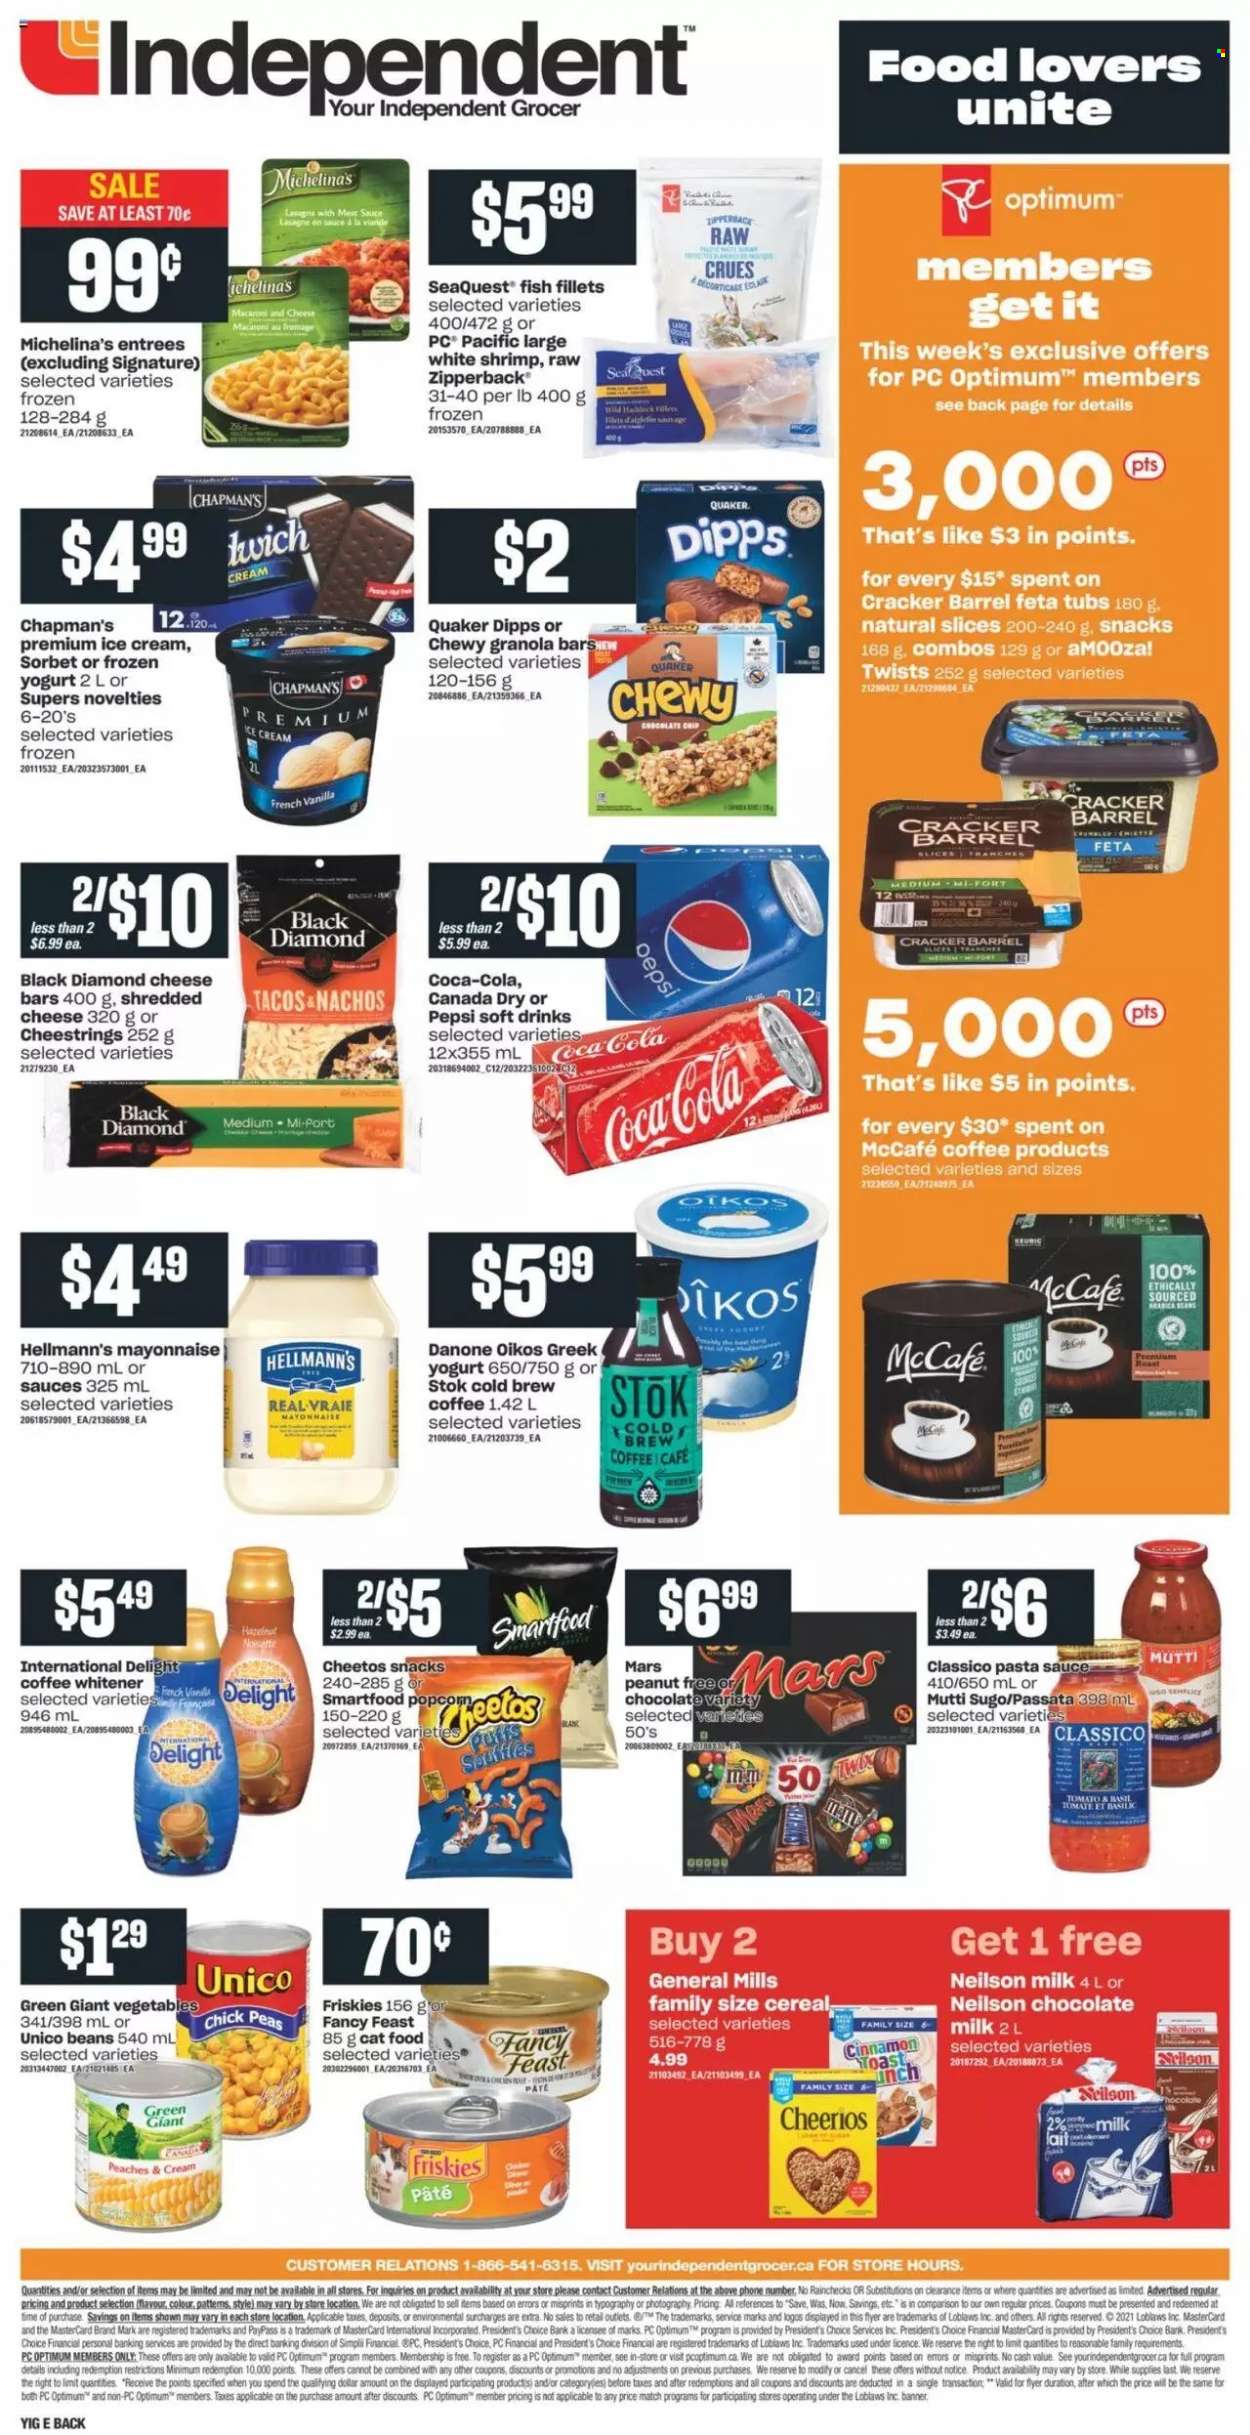 thumbnail - Independent Flyer - October 21, 2021 - October 27, 2021 - Sales products - tacos, peas, peaches, fish fillets, fish, shrimps, macaroni & cheese, pasta sauce, Quaker, lasagna meal, shredded cheese, string cheese, Président, feta, greek yoghurt, yoghurt, Oikos, milk, mayonnaise, Hellmann’s, ice cream, snack, Mars, crackers, Cheetos, Smartfood, cereals, Cheerios, granola bar, cinnamon, Classico, Canada Dry, Coca-Cola, Pepsi, soft drink, coffee, McCafe, animal food, cat food, Optimum, Fancy Feast, Friskies, Danone. Page 2.